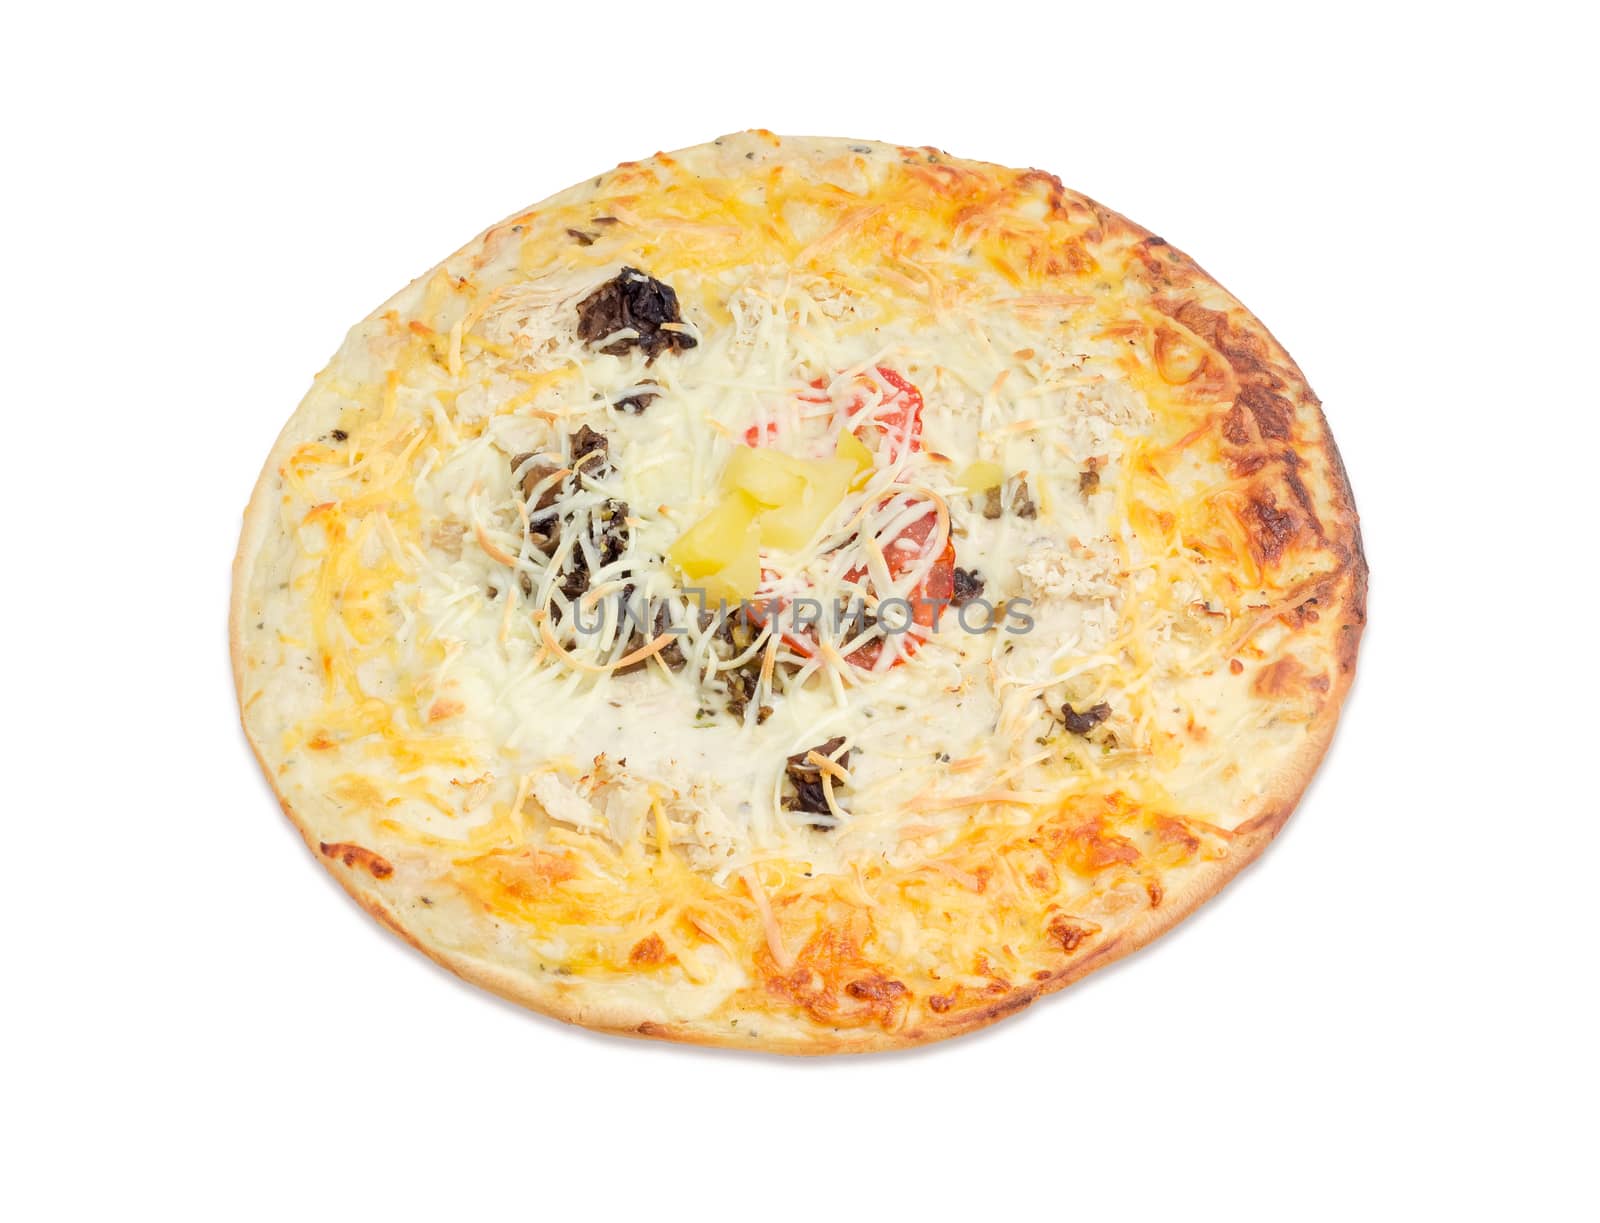 Cooked pizza with mushrooms and plenty of cheese by anmbph